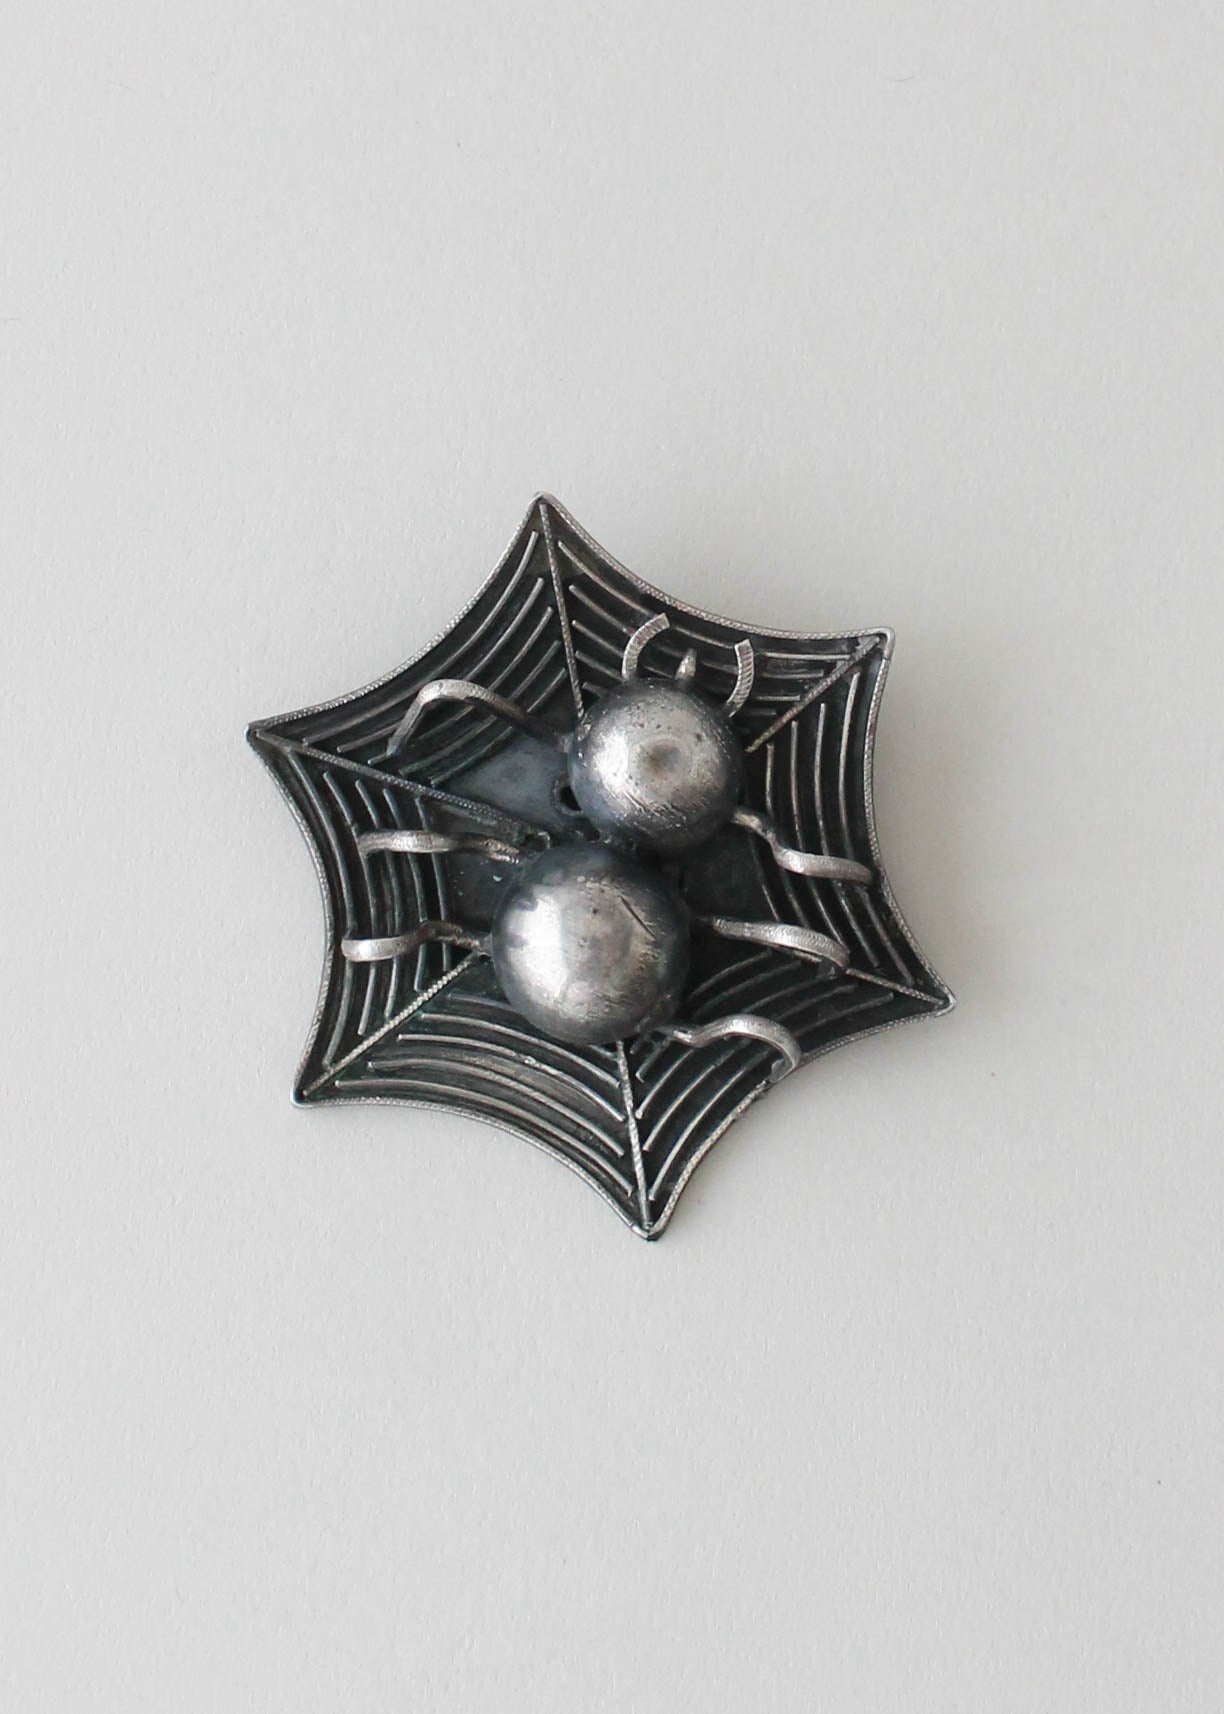 Vintage 1960s Sterling Silver Spider Brooch Selected by Lux